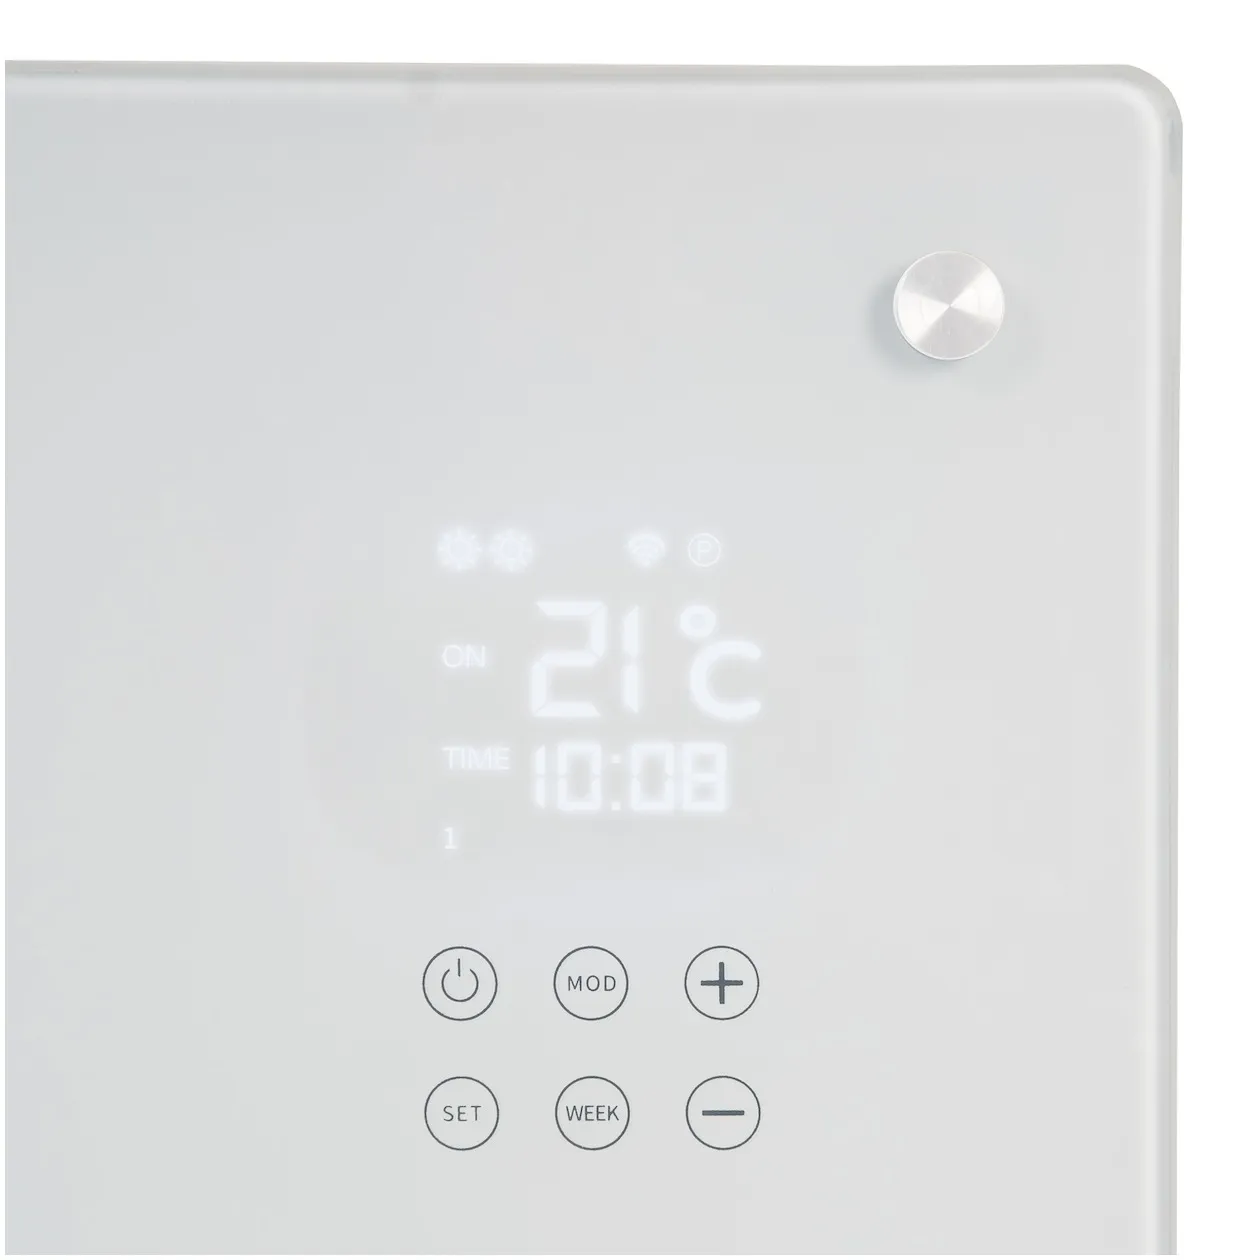 Eurom Alutherm Sani Verre 1200 WiFi Wit